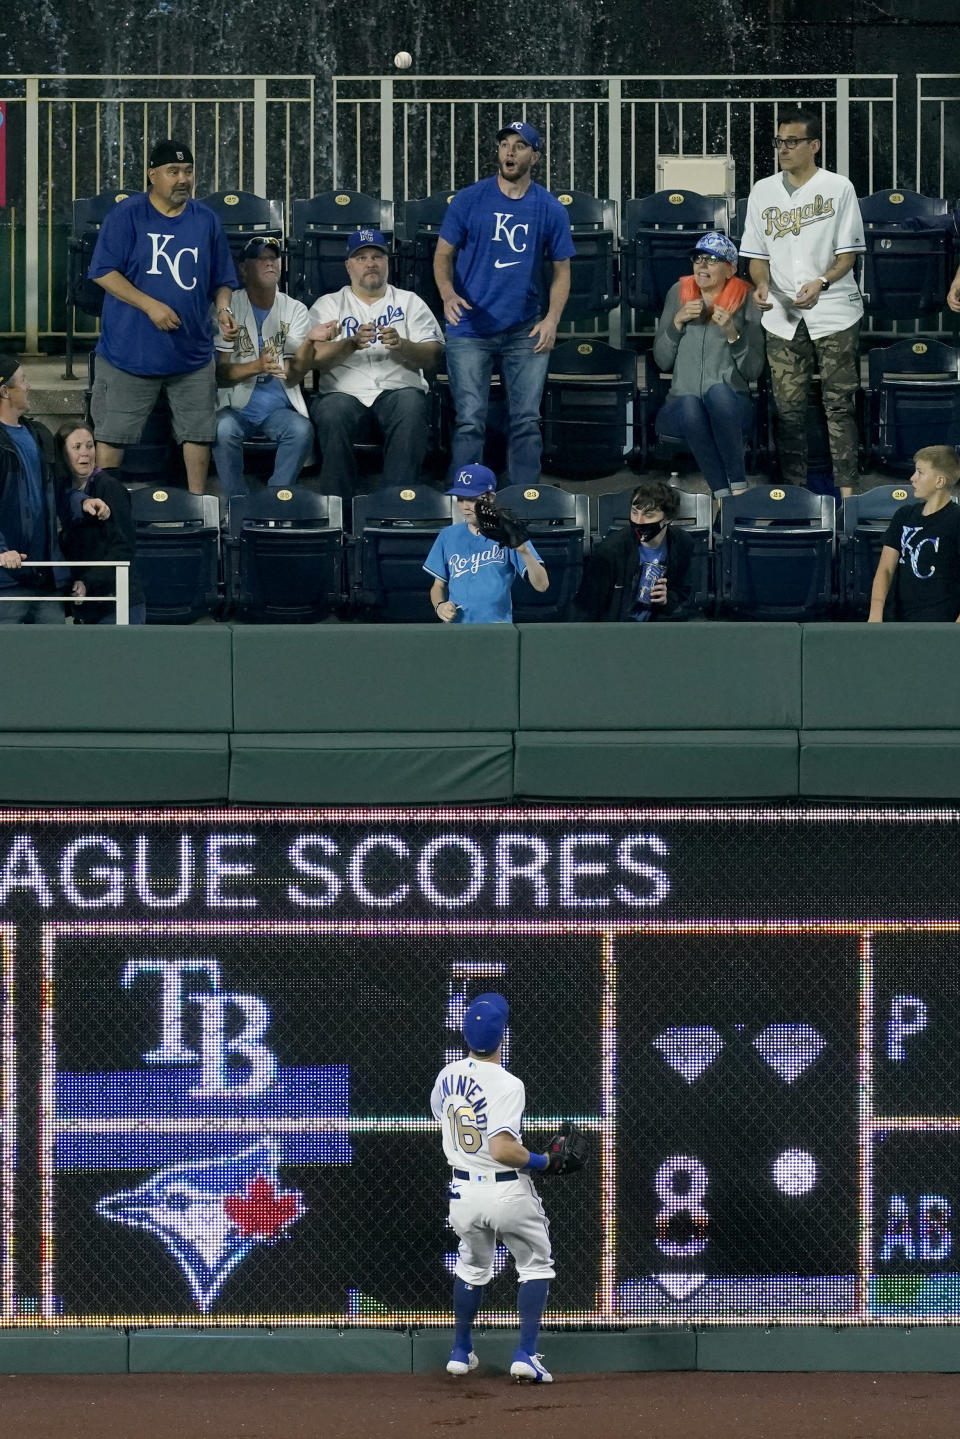 Kansas City Royals left fielder Andrew Benintendi watches a grand slam by Detroit Tigers' Miguel Cabrera during the seventh inning of a baseball game Friday, May 21, 2021, in Kansas City, Mo. (AP Photo/Charlie Riedel)